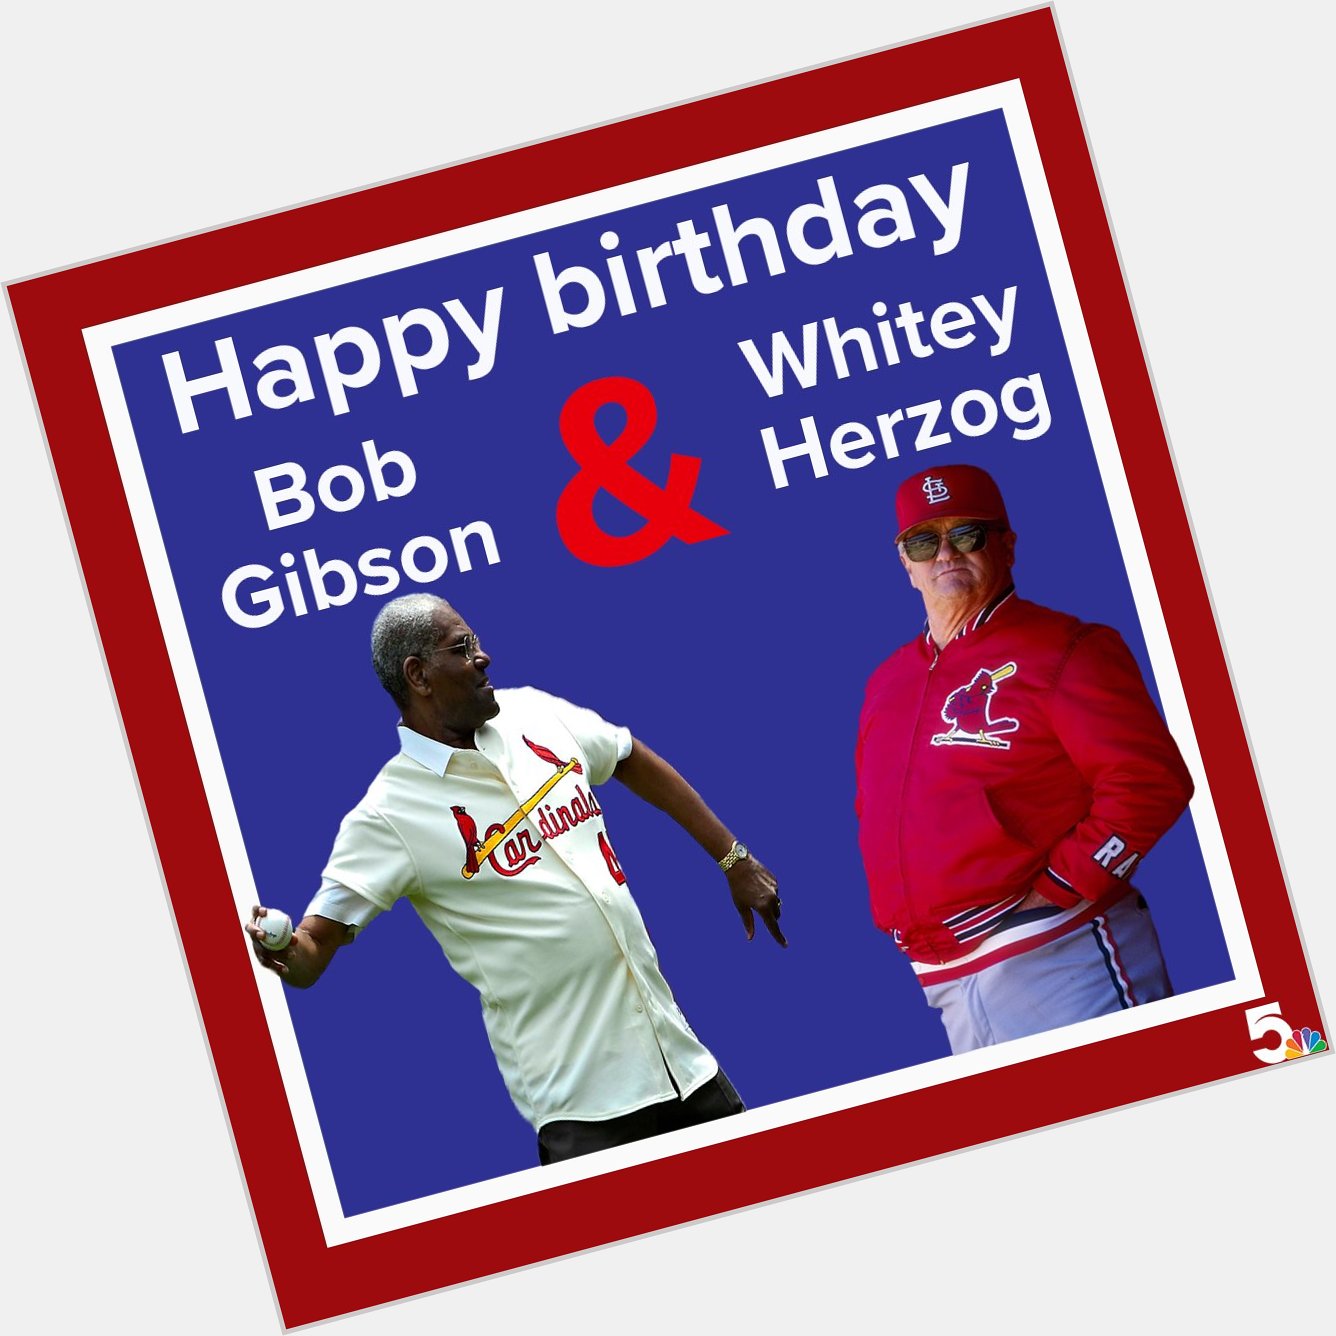 Two hall of famers, one birthday!

Happy birthday to legends Bob Gibson and Whitey Herzog!   